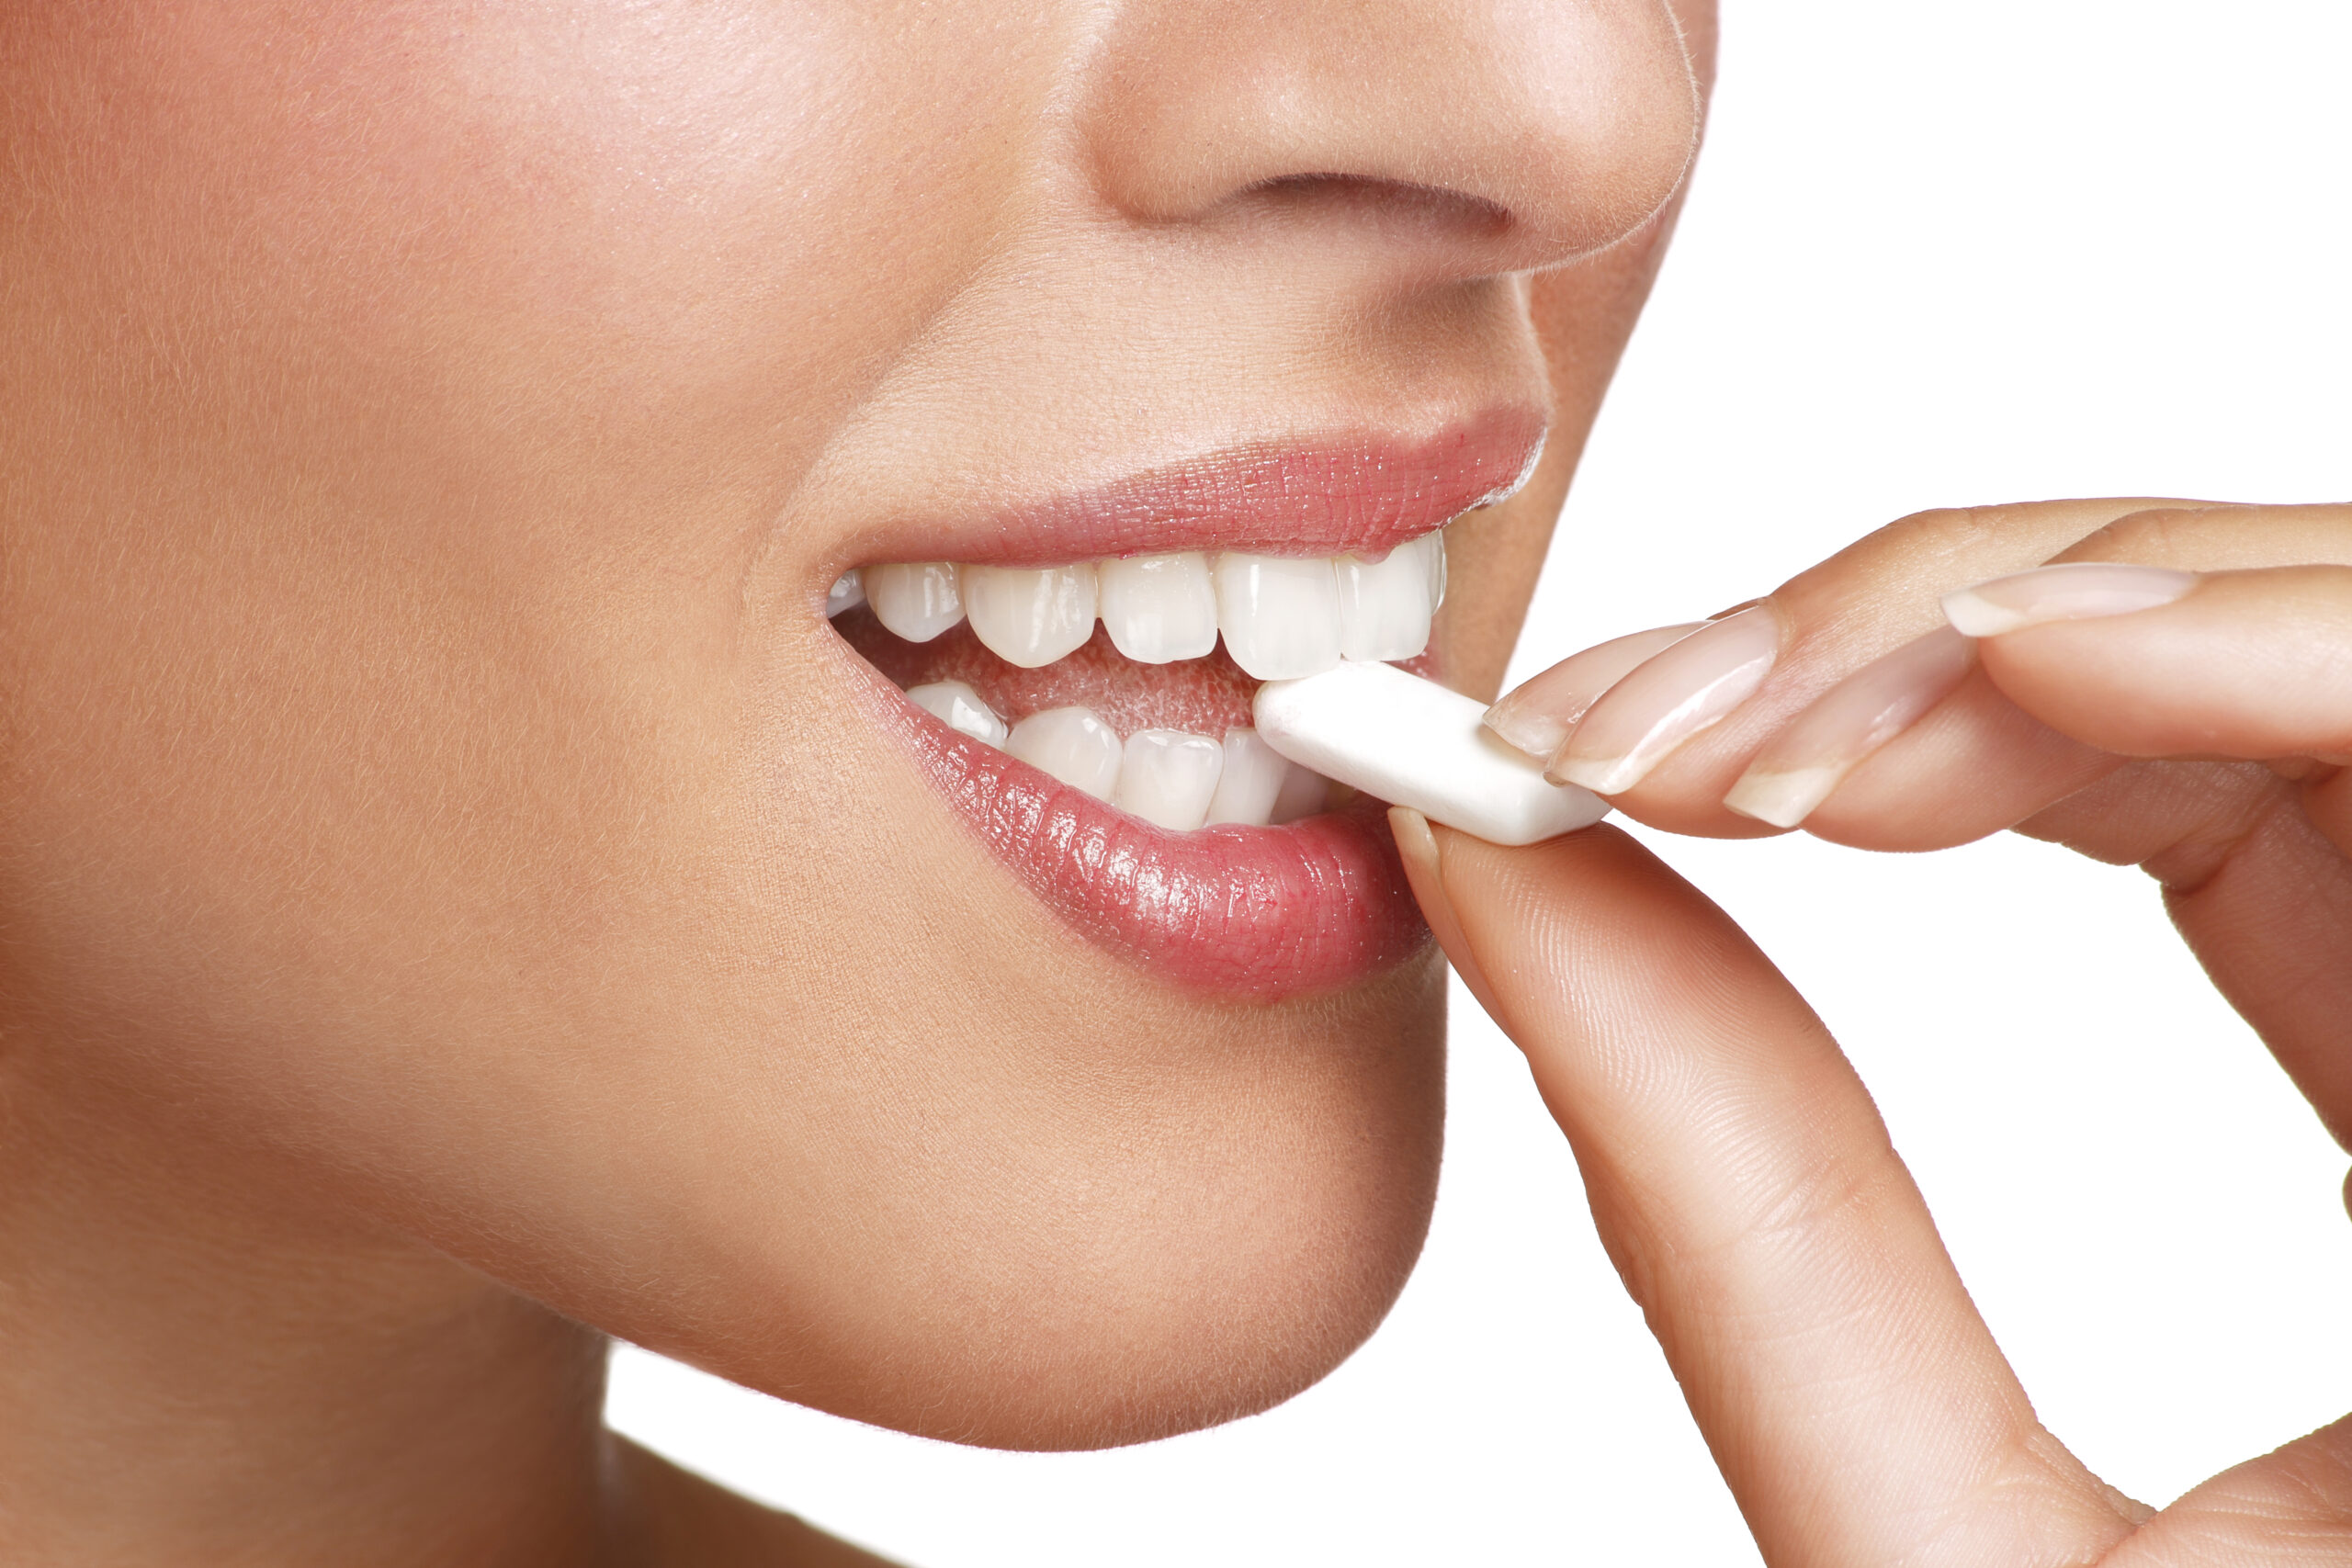 Benefits of Sugar-Free Chewing Gum for Your Teeth